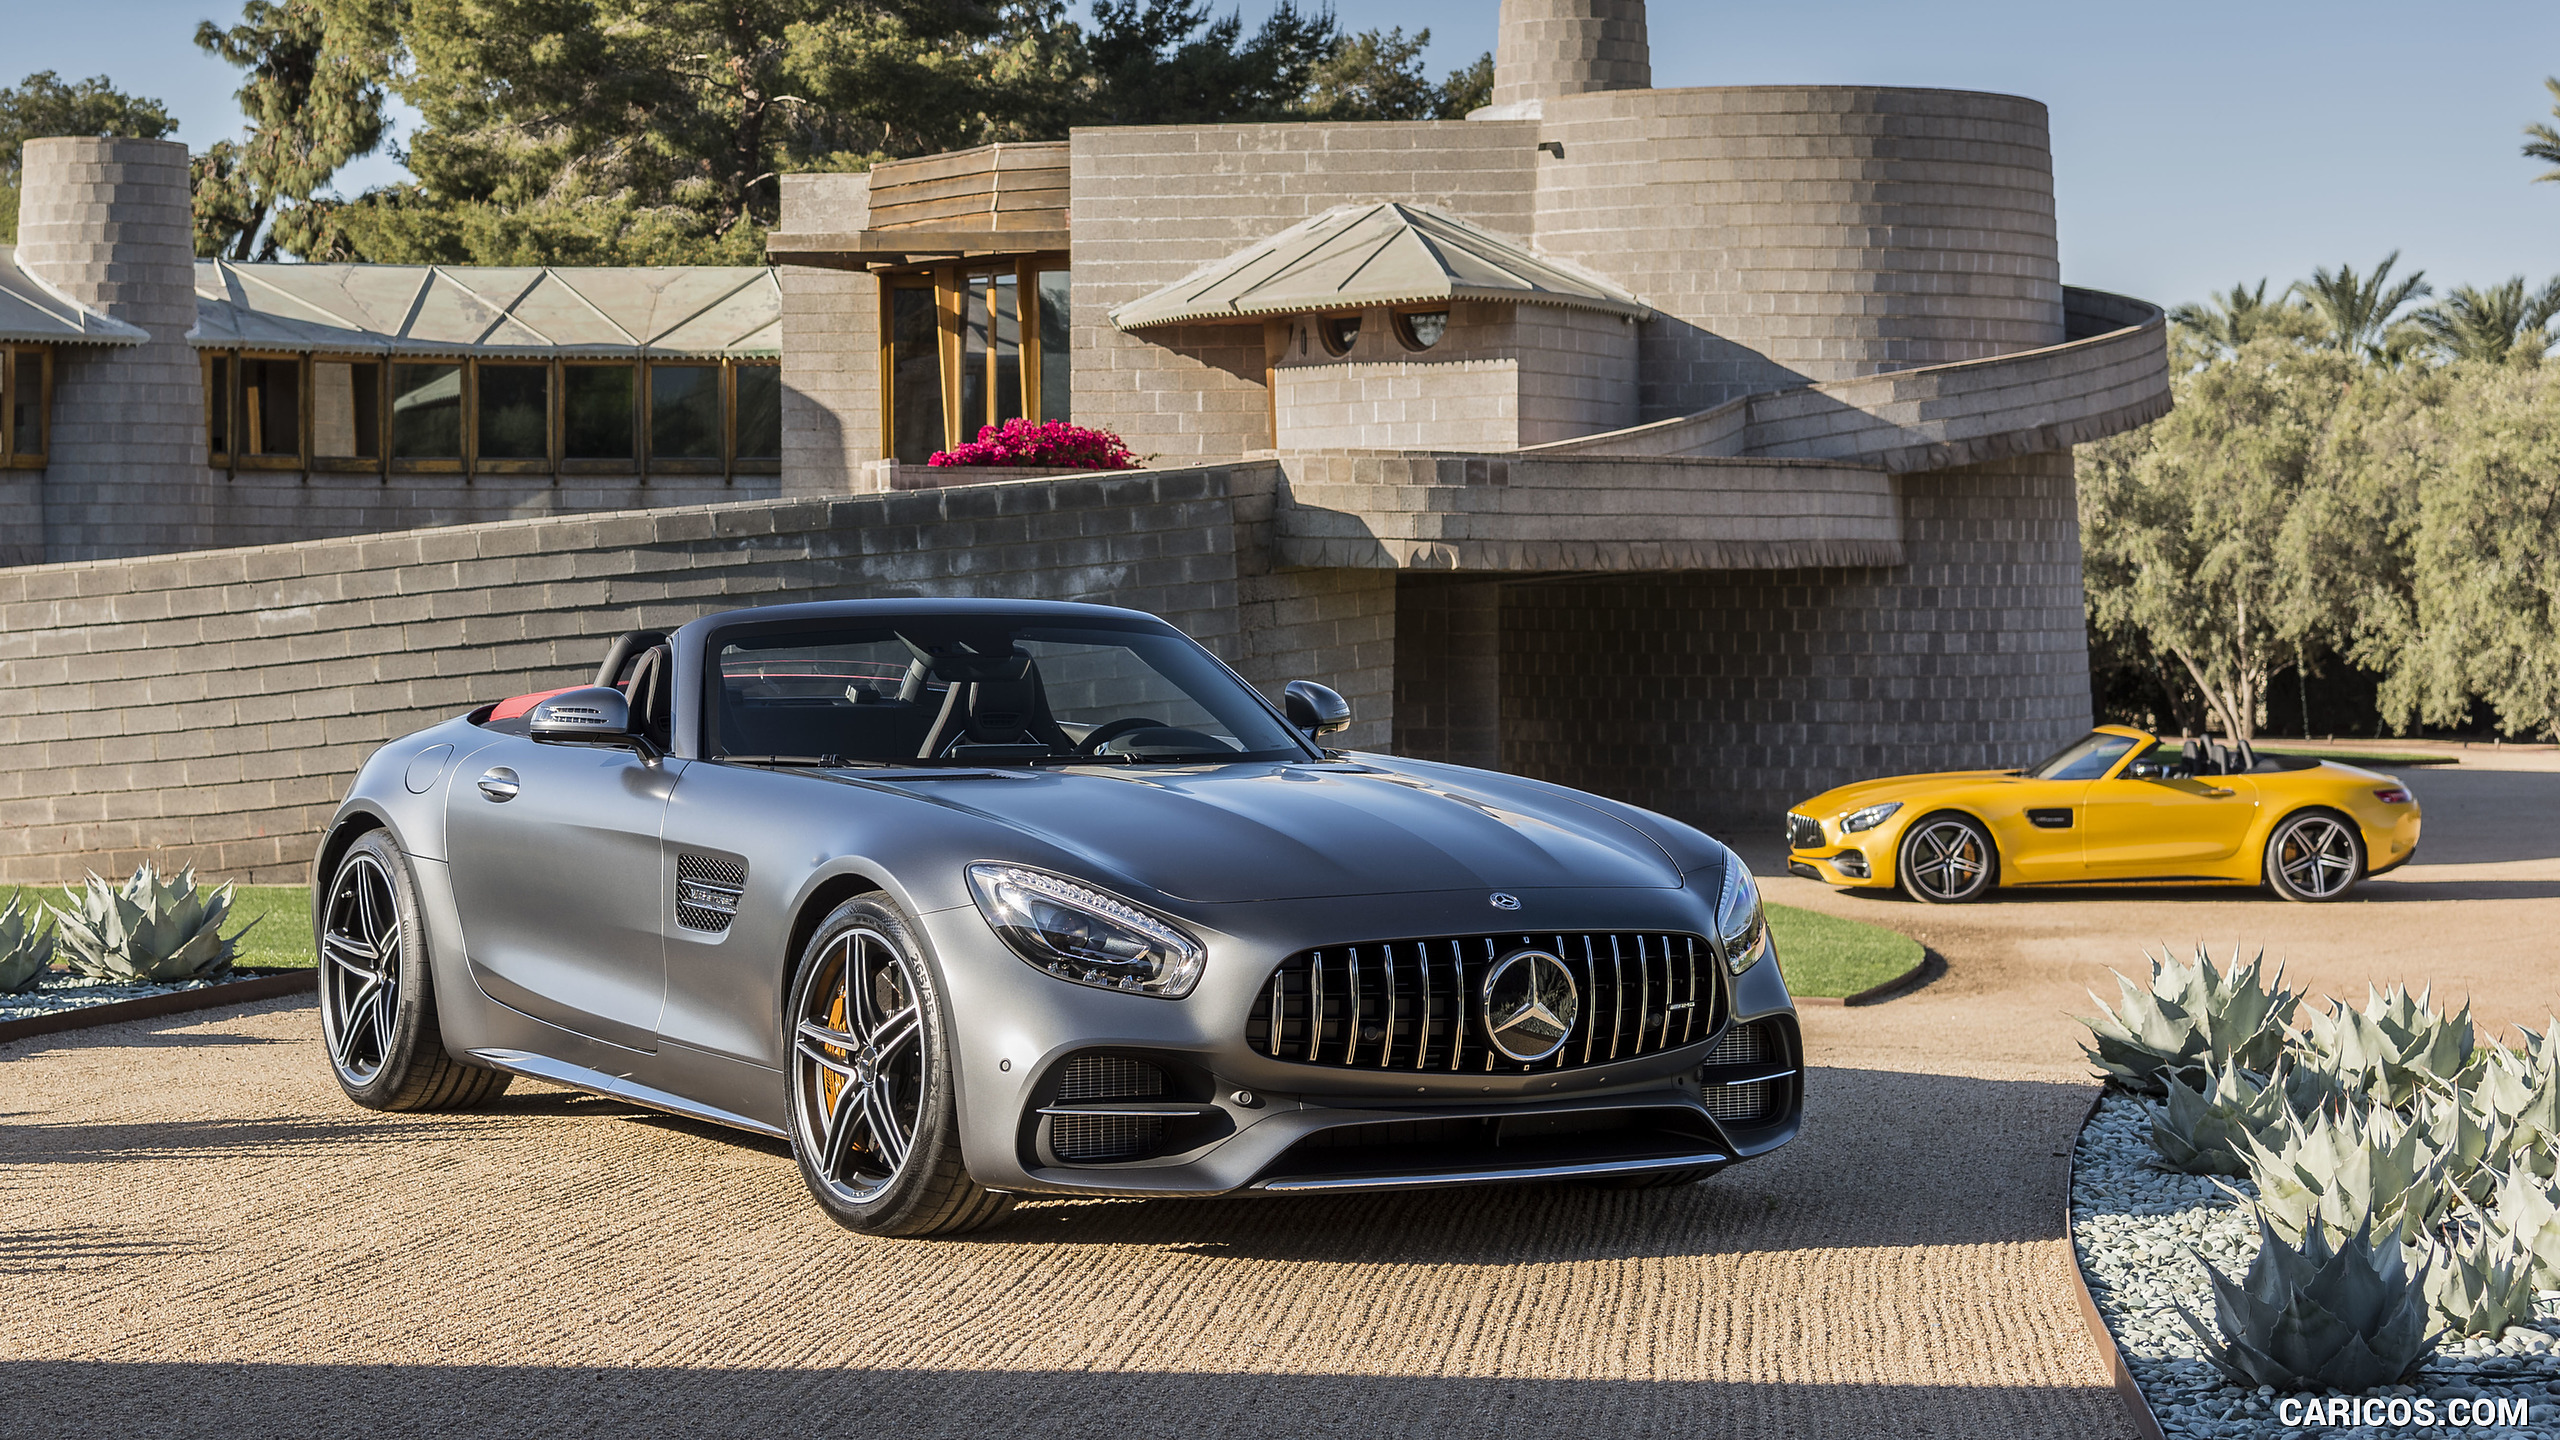 2018 Mercedes-AMG GT C Roadster - Front Three-Quarter, #331 of 350